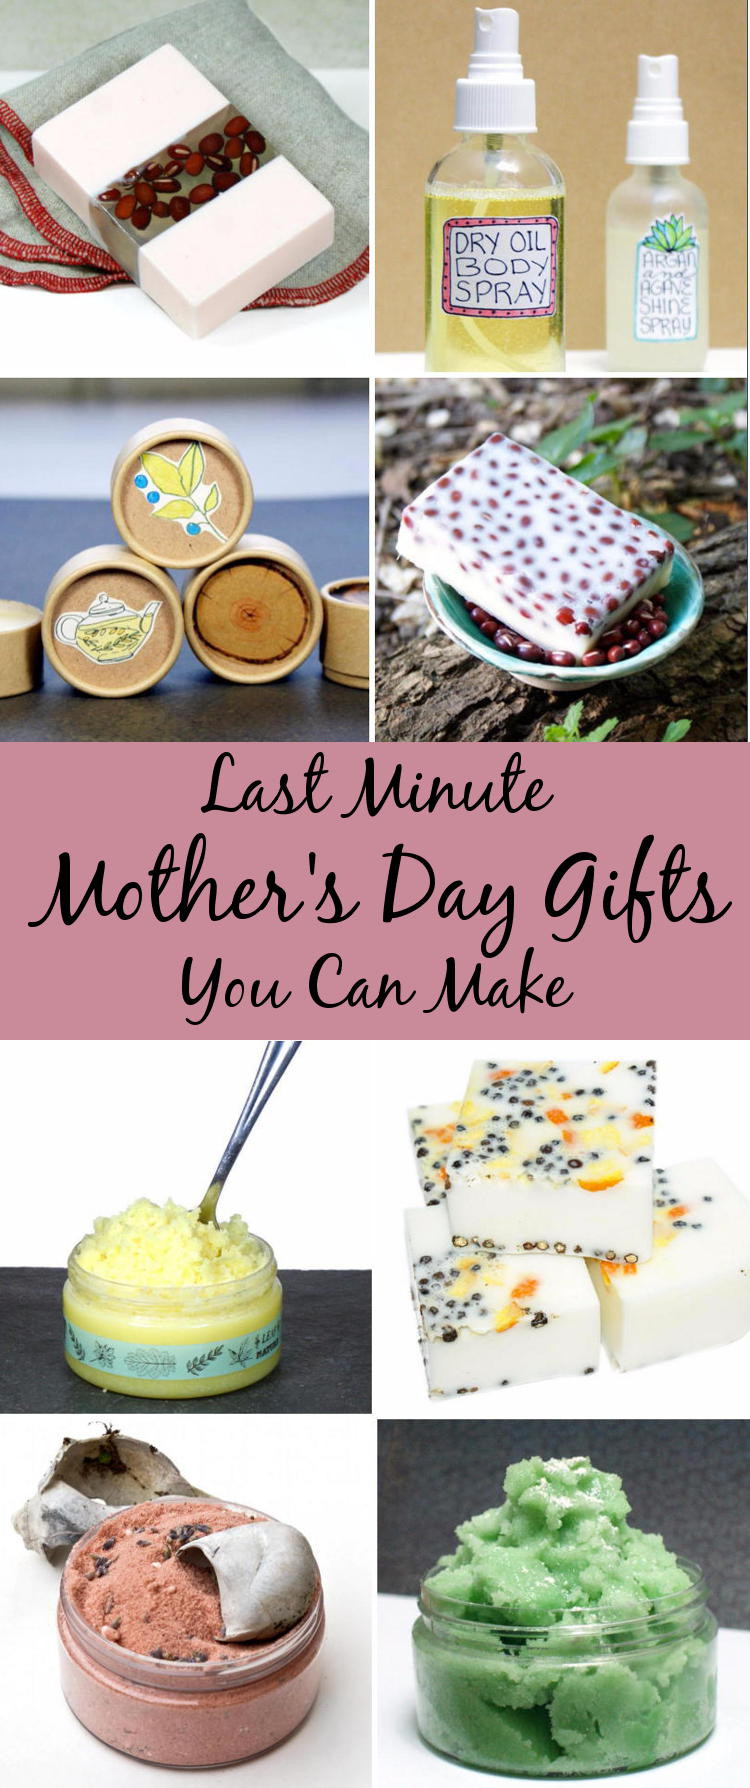 Motherday Gift Ideas
 Last Minute Mother s Day Gift Ideas Soap Deli News